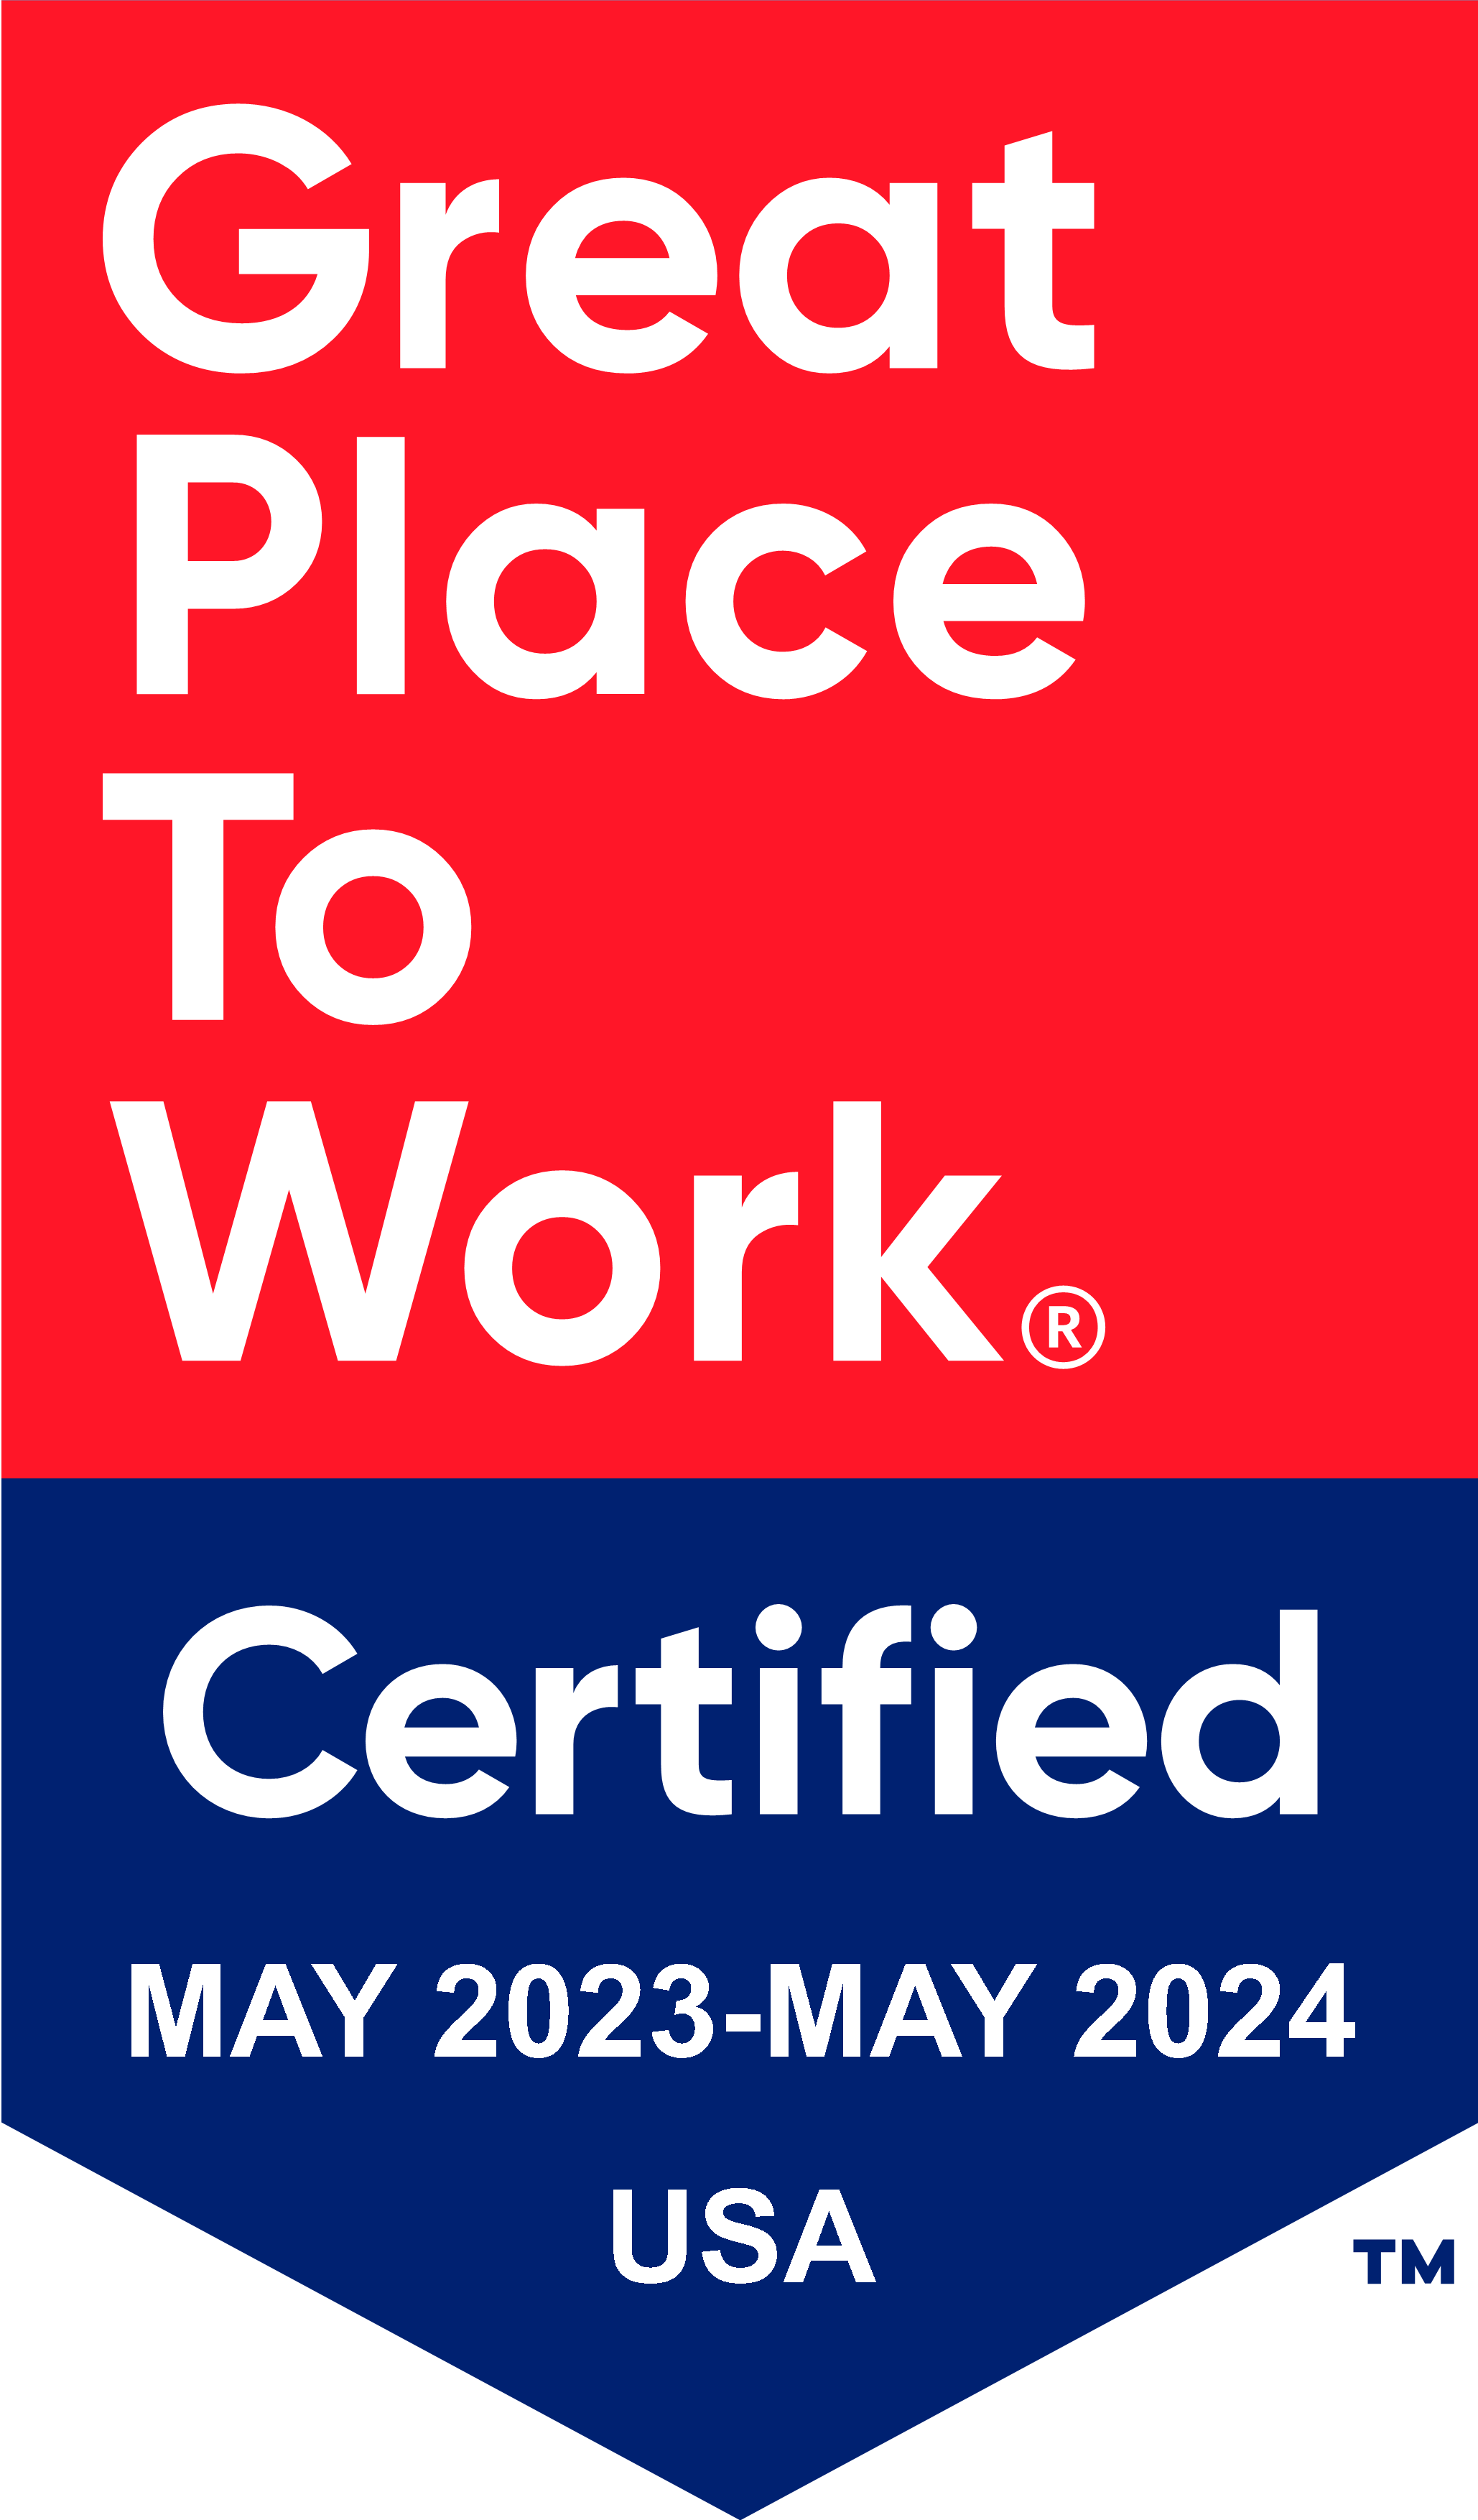 Great Place To Work - Certified May 2023 - May 2024